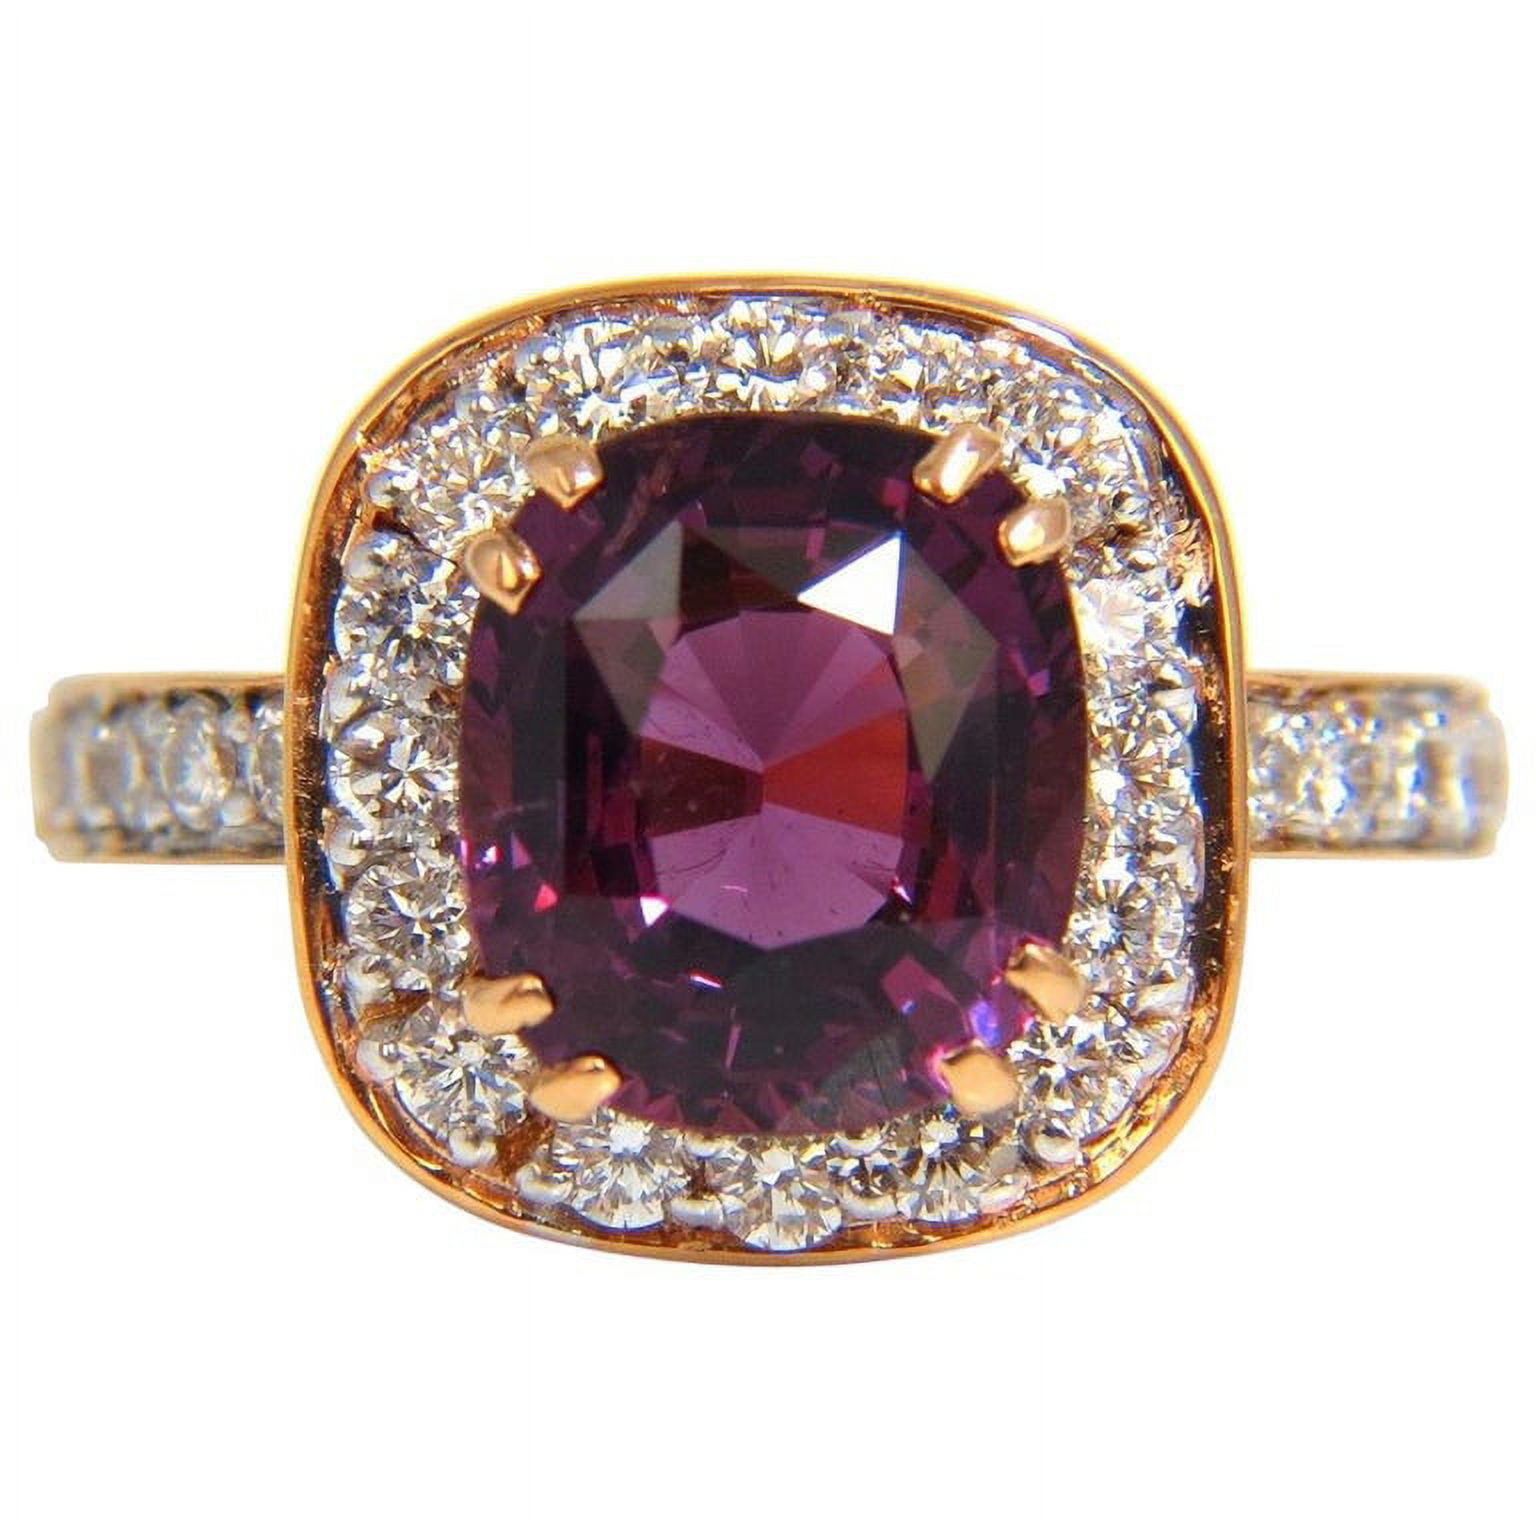 fa_gems - So excited to share our charming Afghanistan purple spinel ring!!  It is so so elegant, with some purple sapphire set around it, it is so so  noble! | Facebook